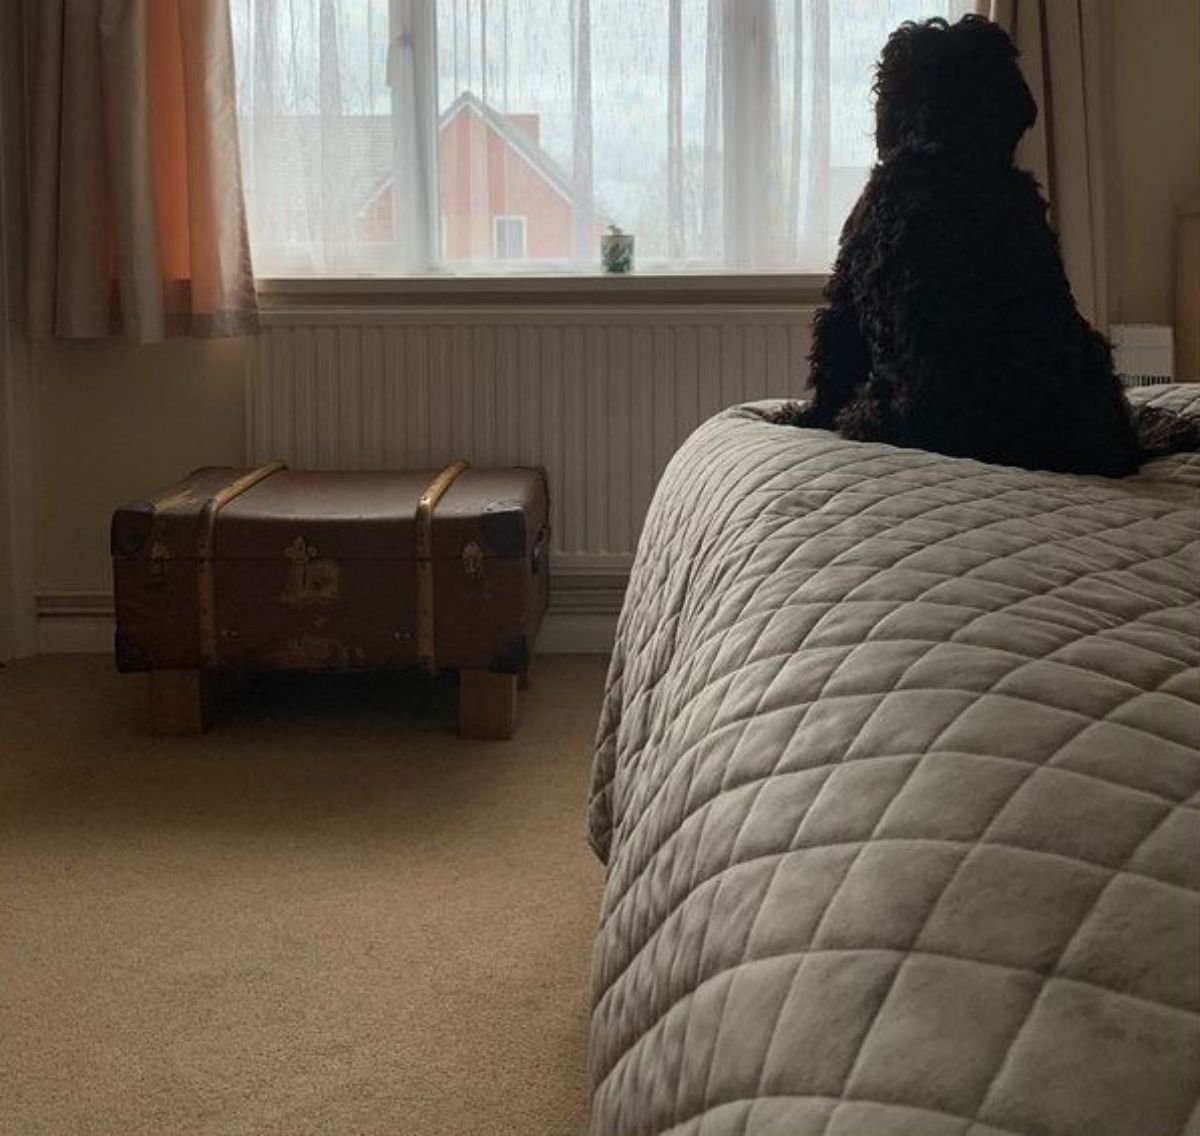 black fluffy dog sitting on a brown dog and looking out the window